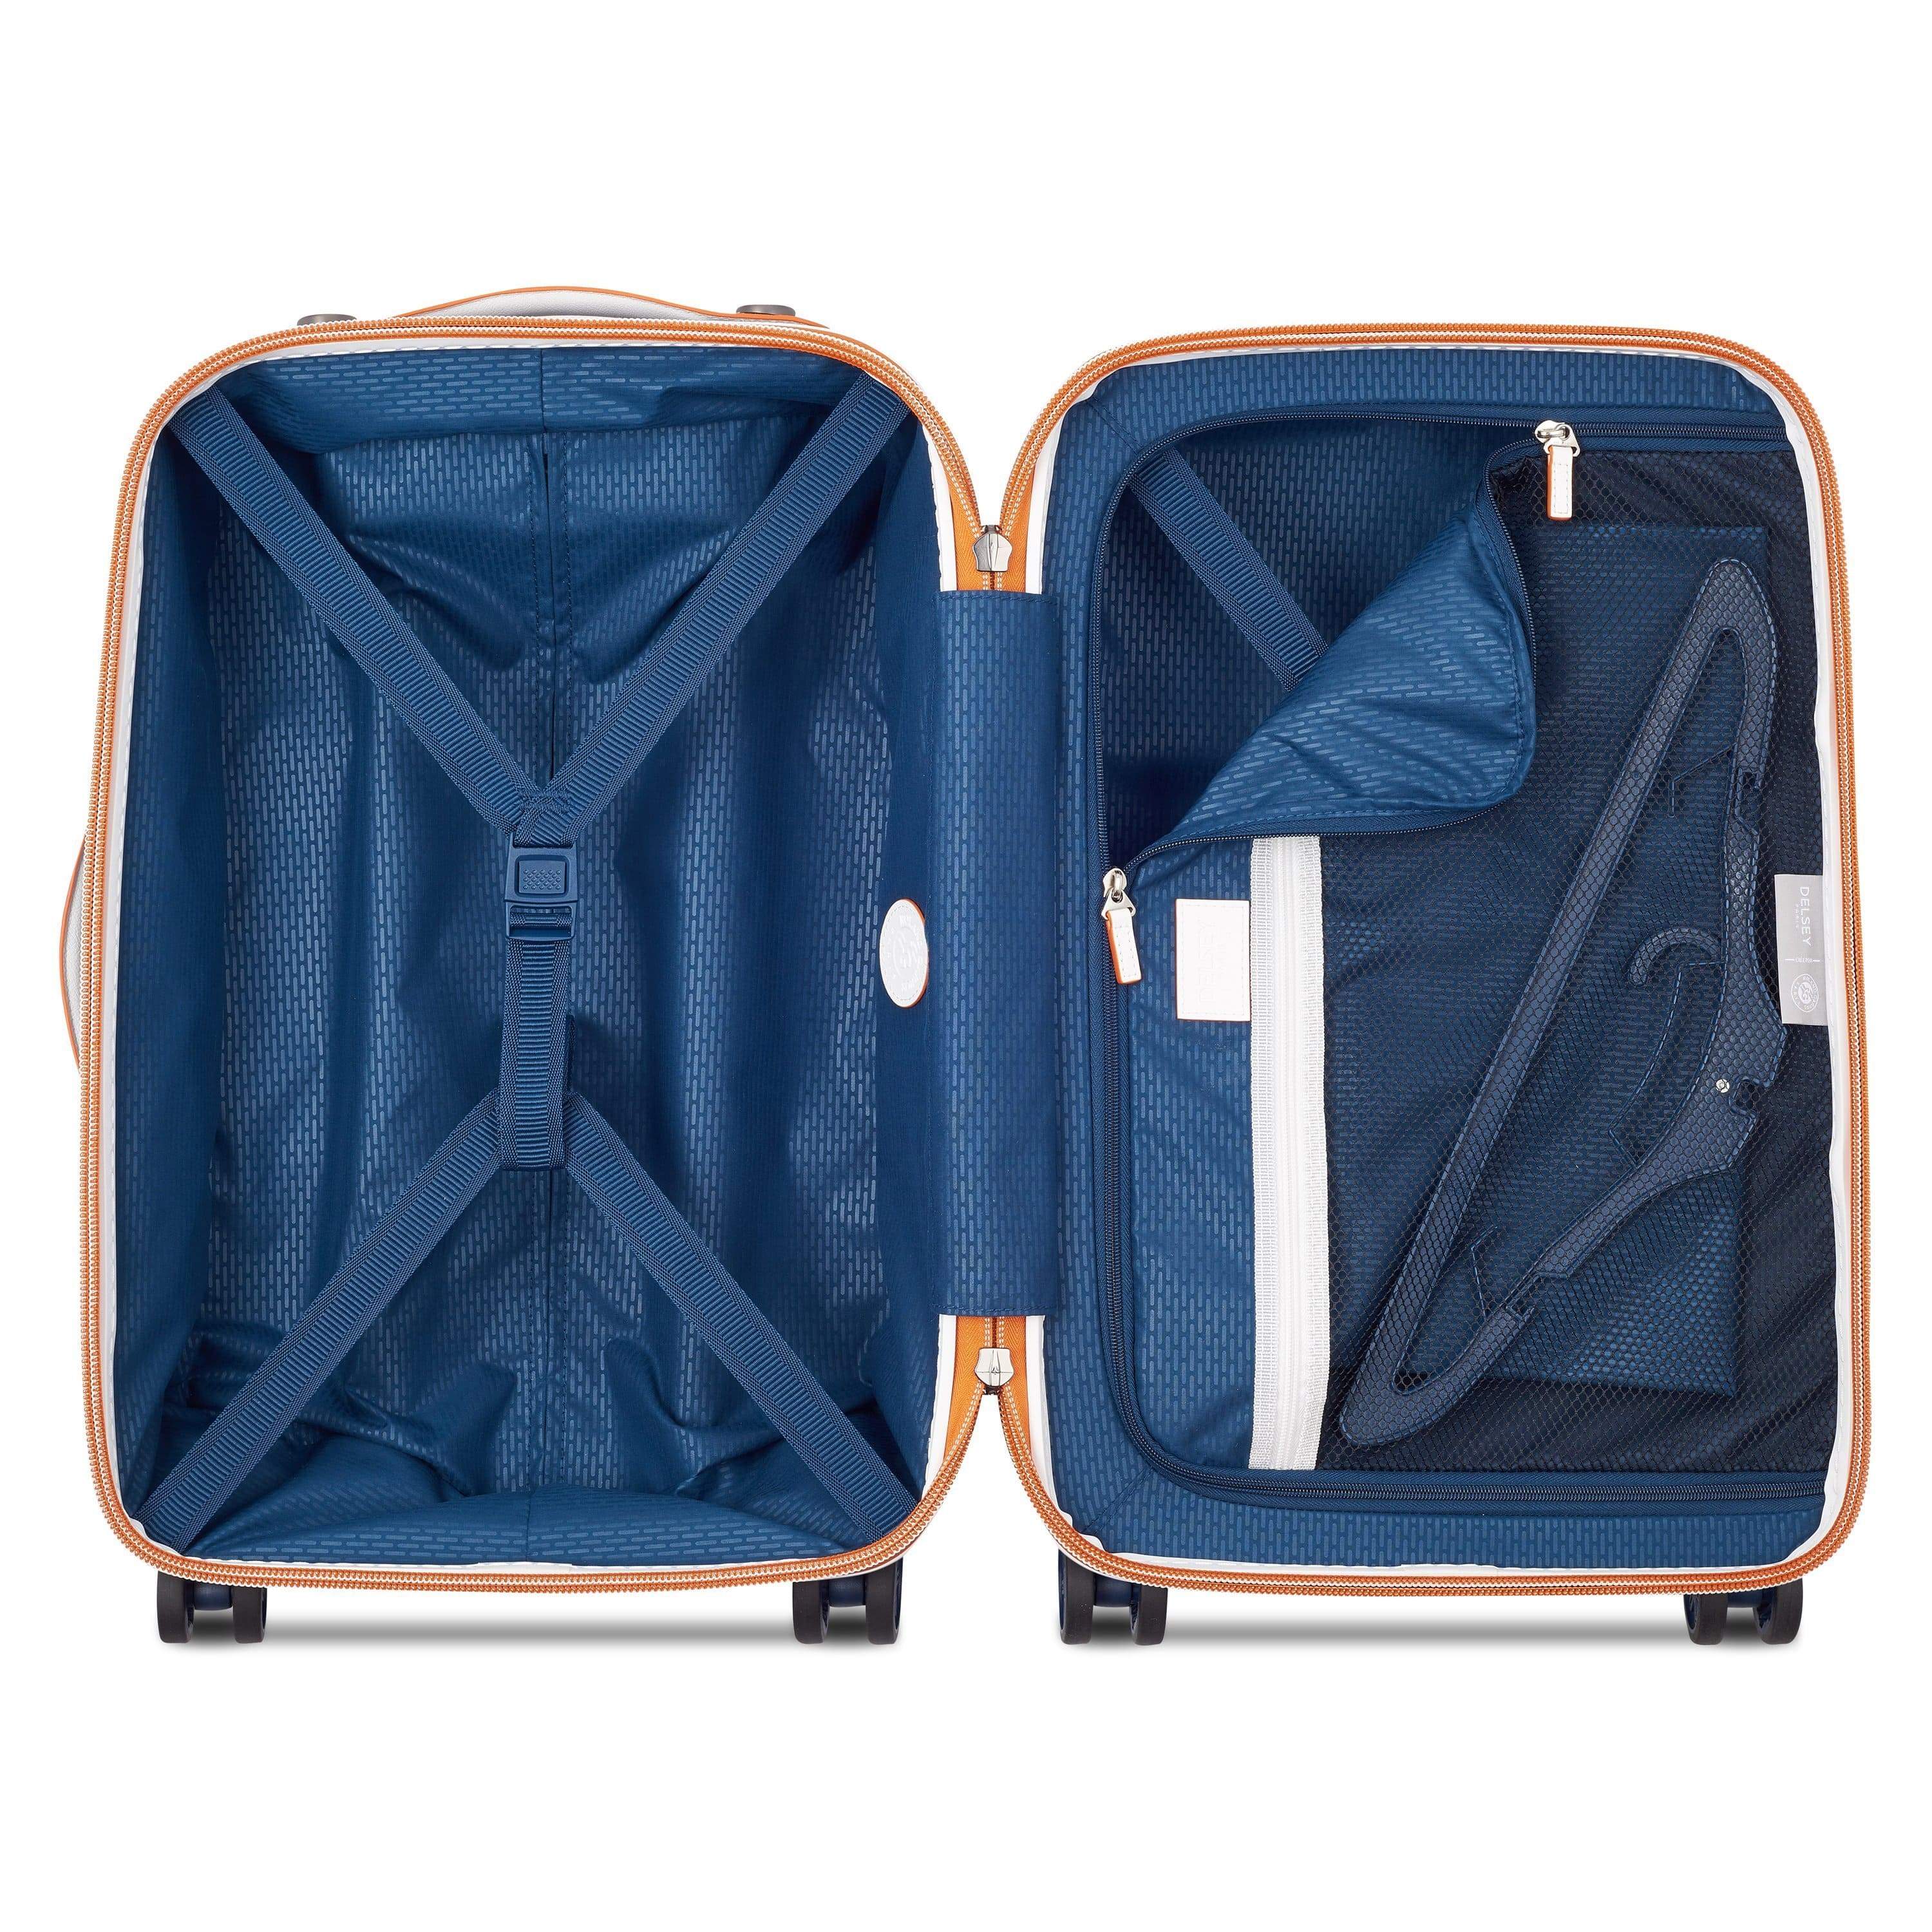 Delsey Chatelet Air 55cm Hardcase 4 Double Wheel Cabin Luggage Trolley Navy - 00167280902